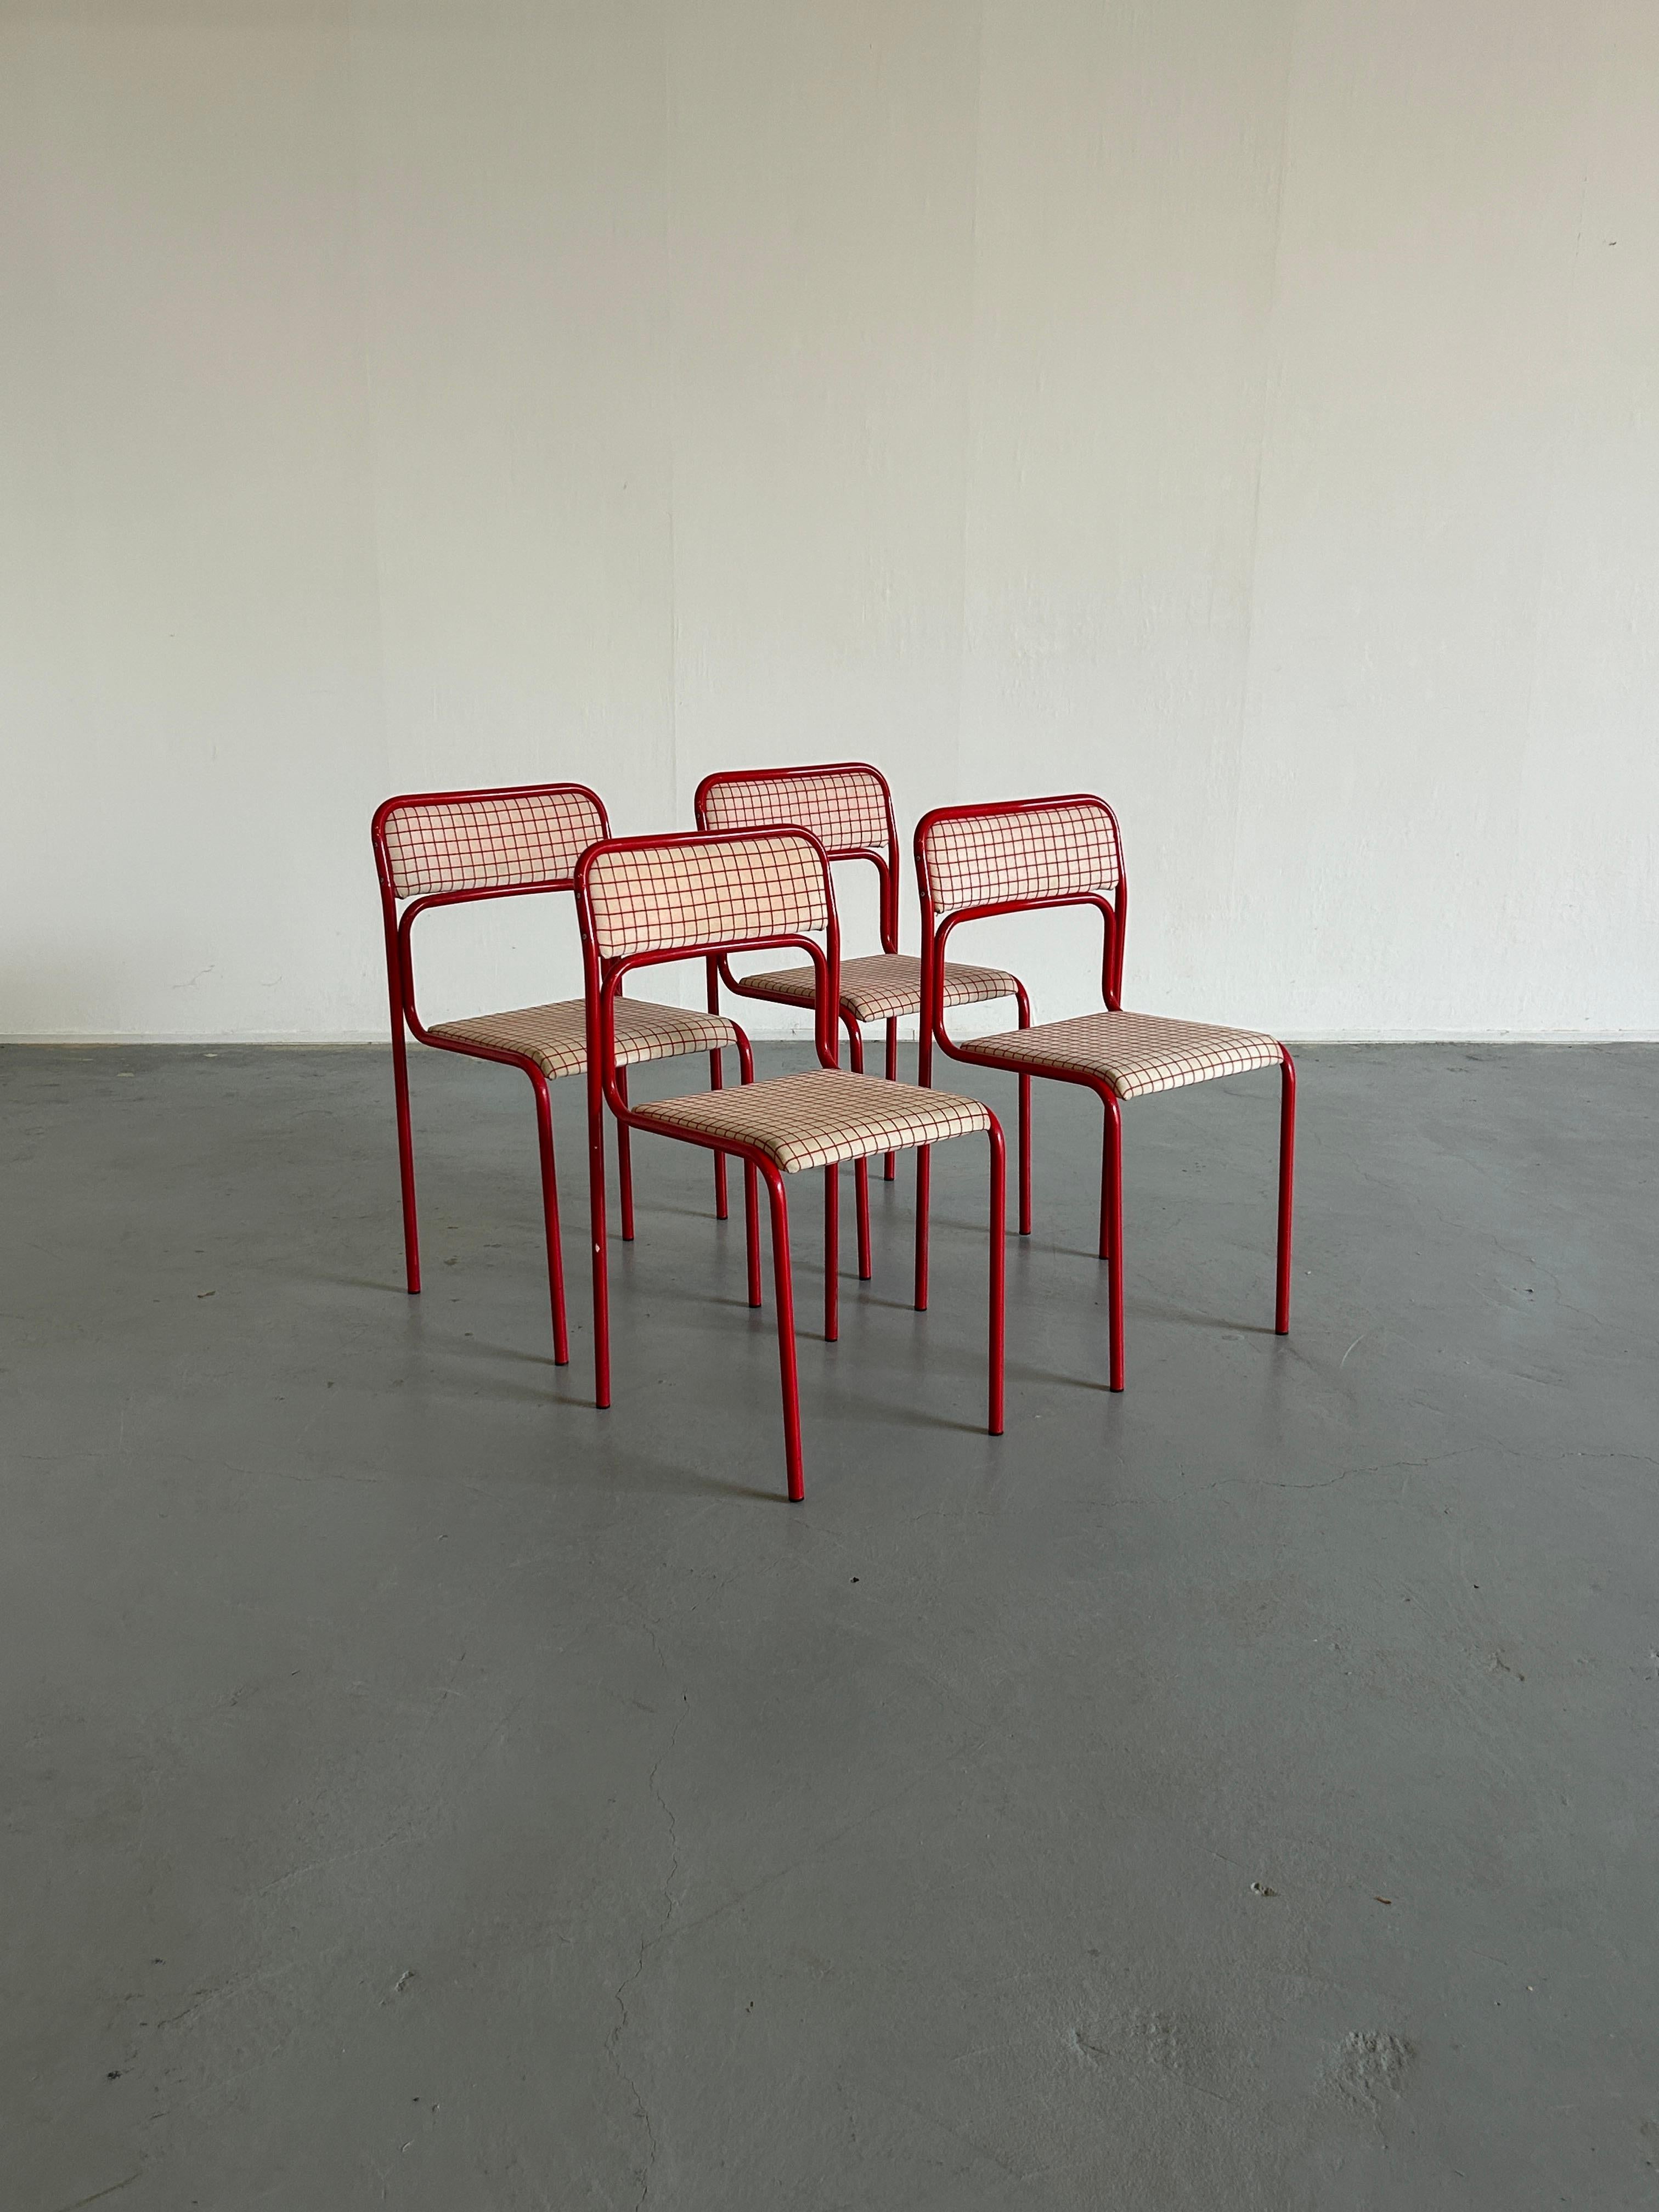 Pop-art style red-white checkered upholstery modernist chairs.
Painted tubular steel base, wooden upholstered seat and backrest.
Stackable.

In good vintage condition with expected signs of age.
Upholstery with signs of wear and some stains, but